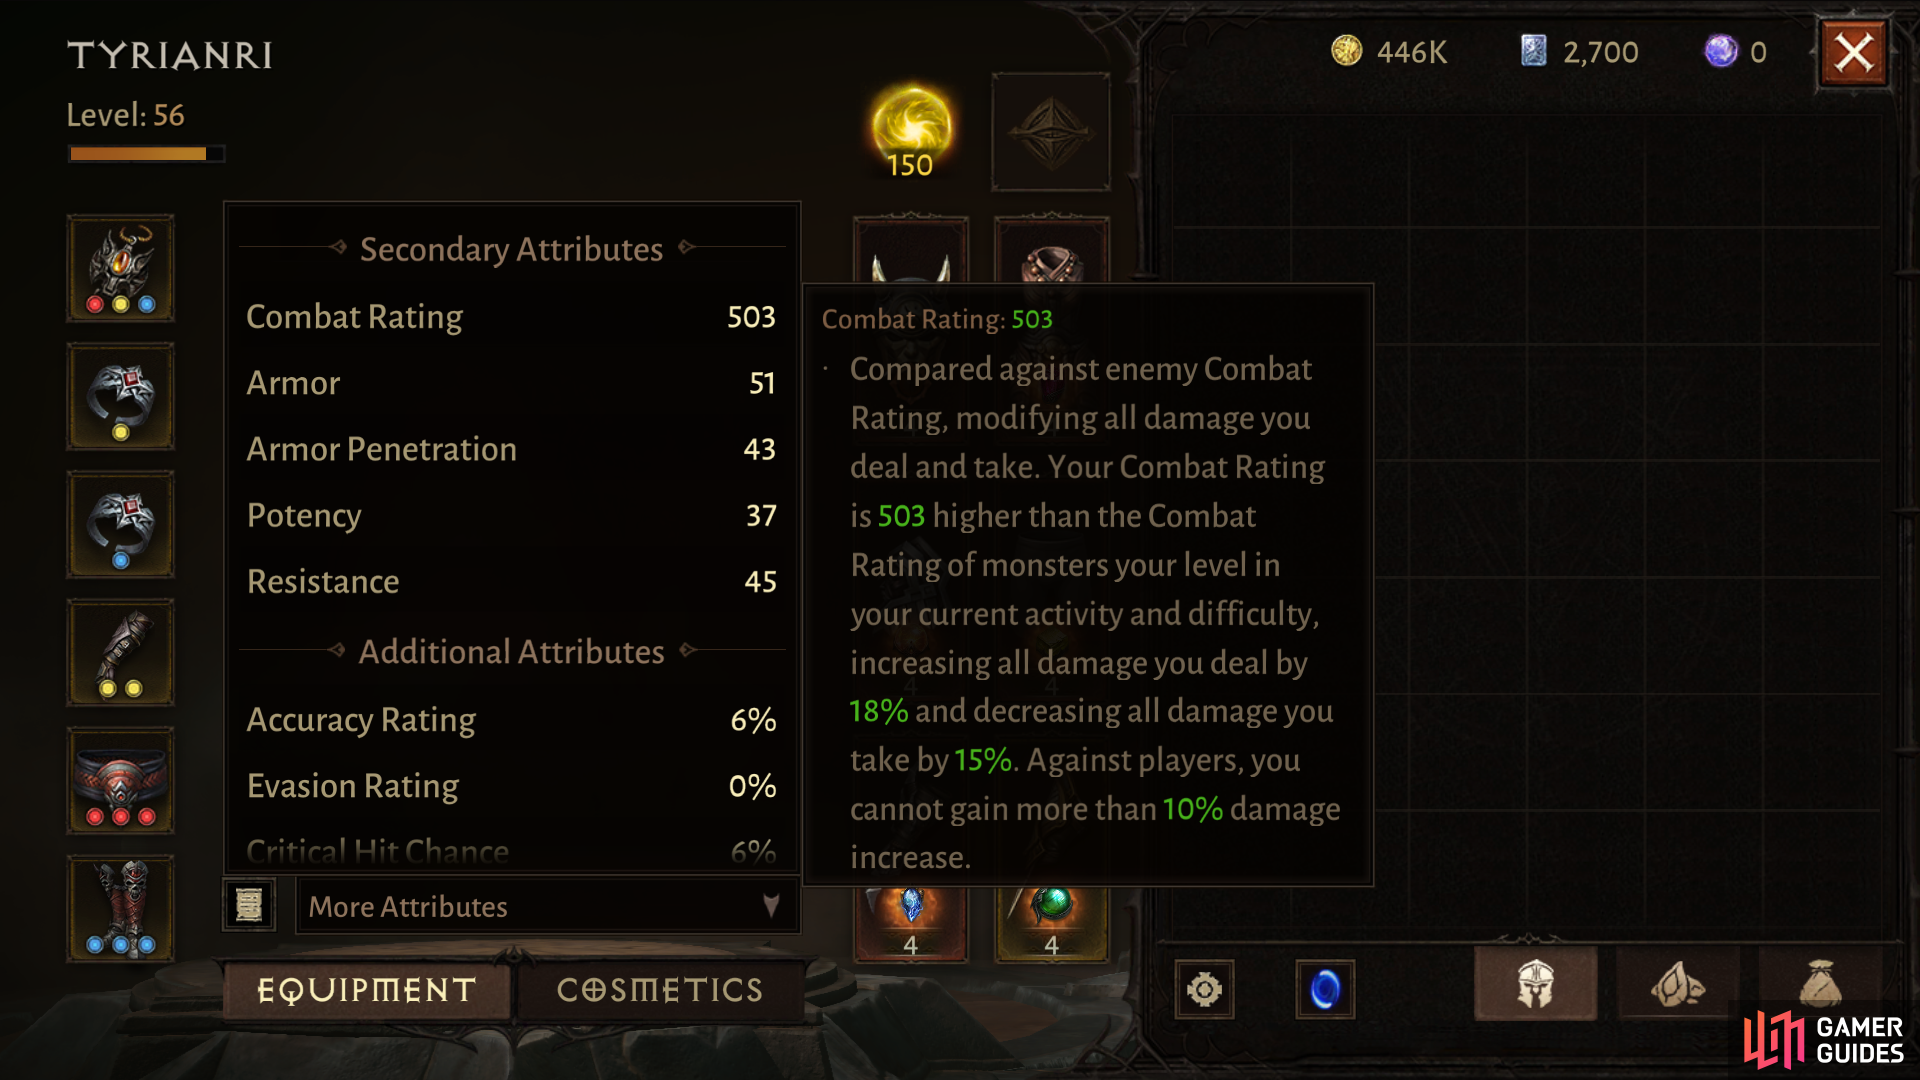 Combat Rating is a derived stat that gives you damage/resilience bonuses or penalties.